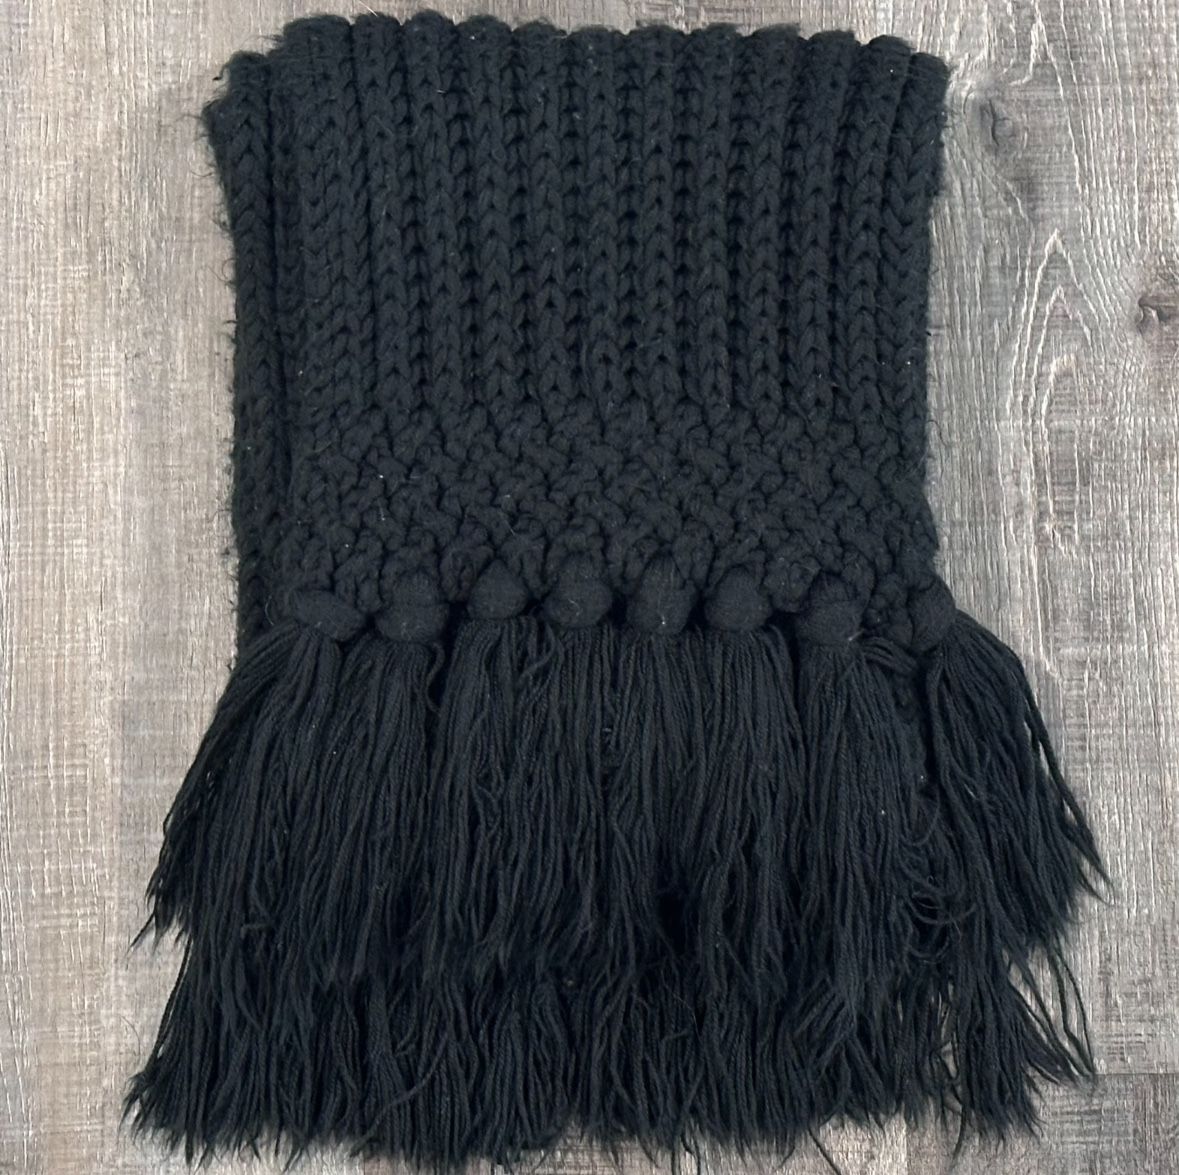 6-Foot Thick Black Knit Scarf